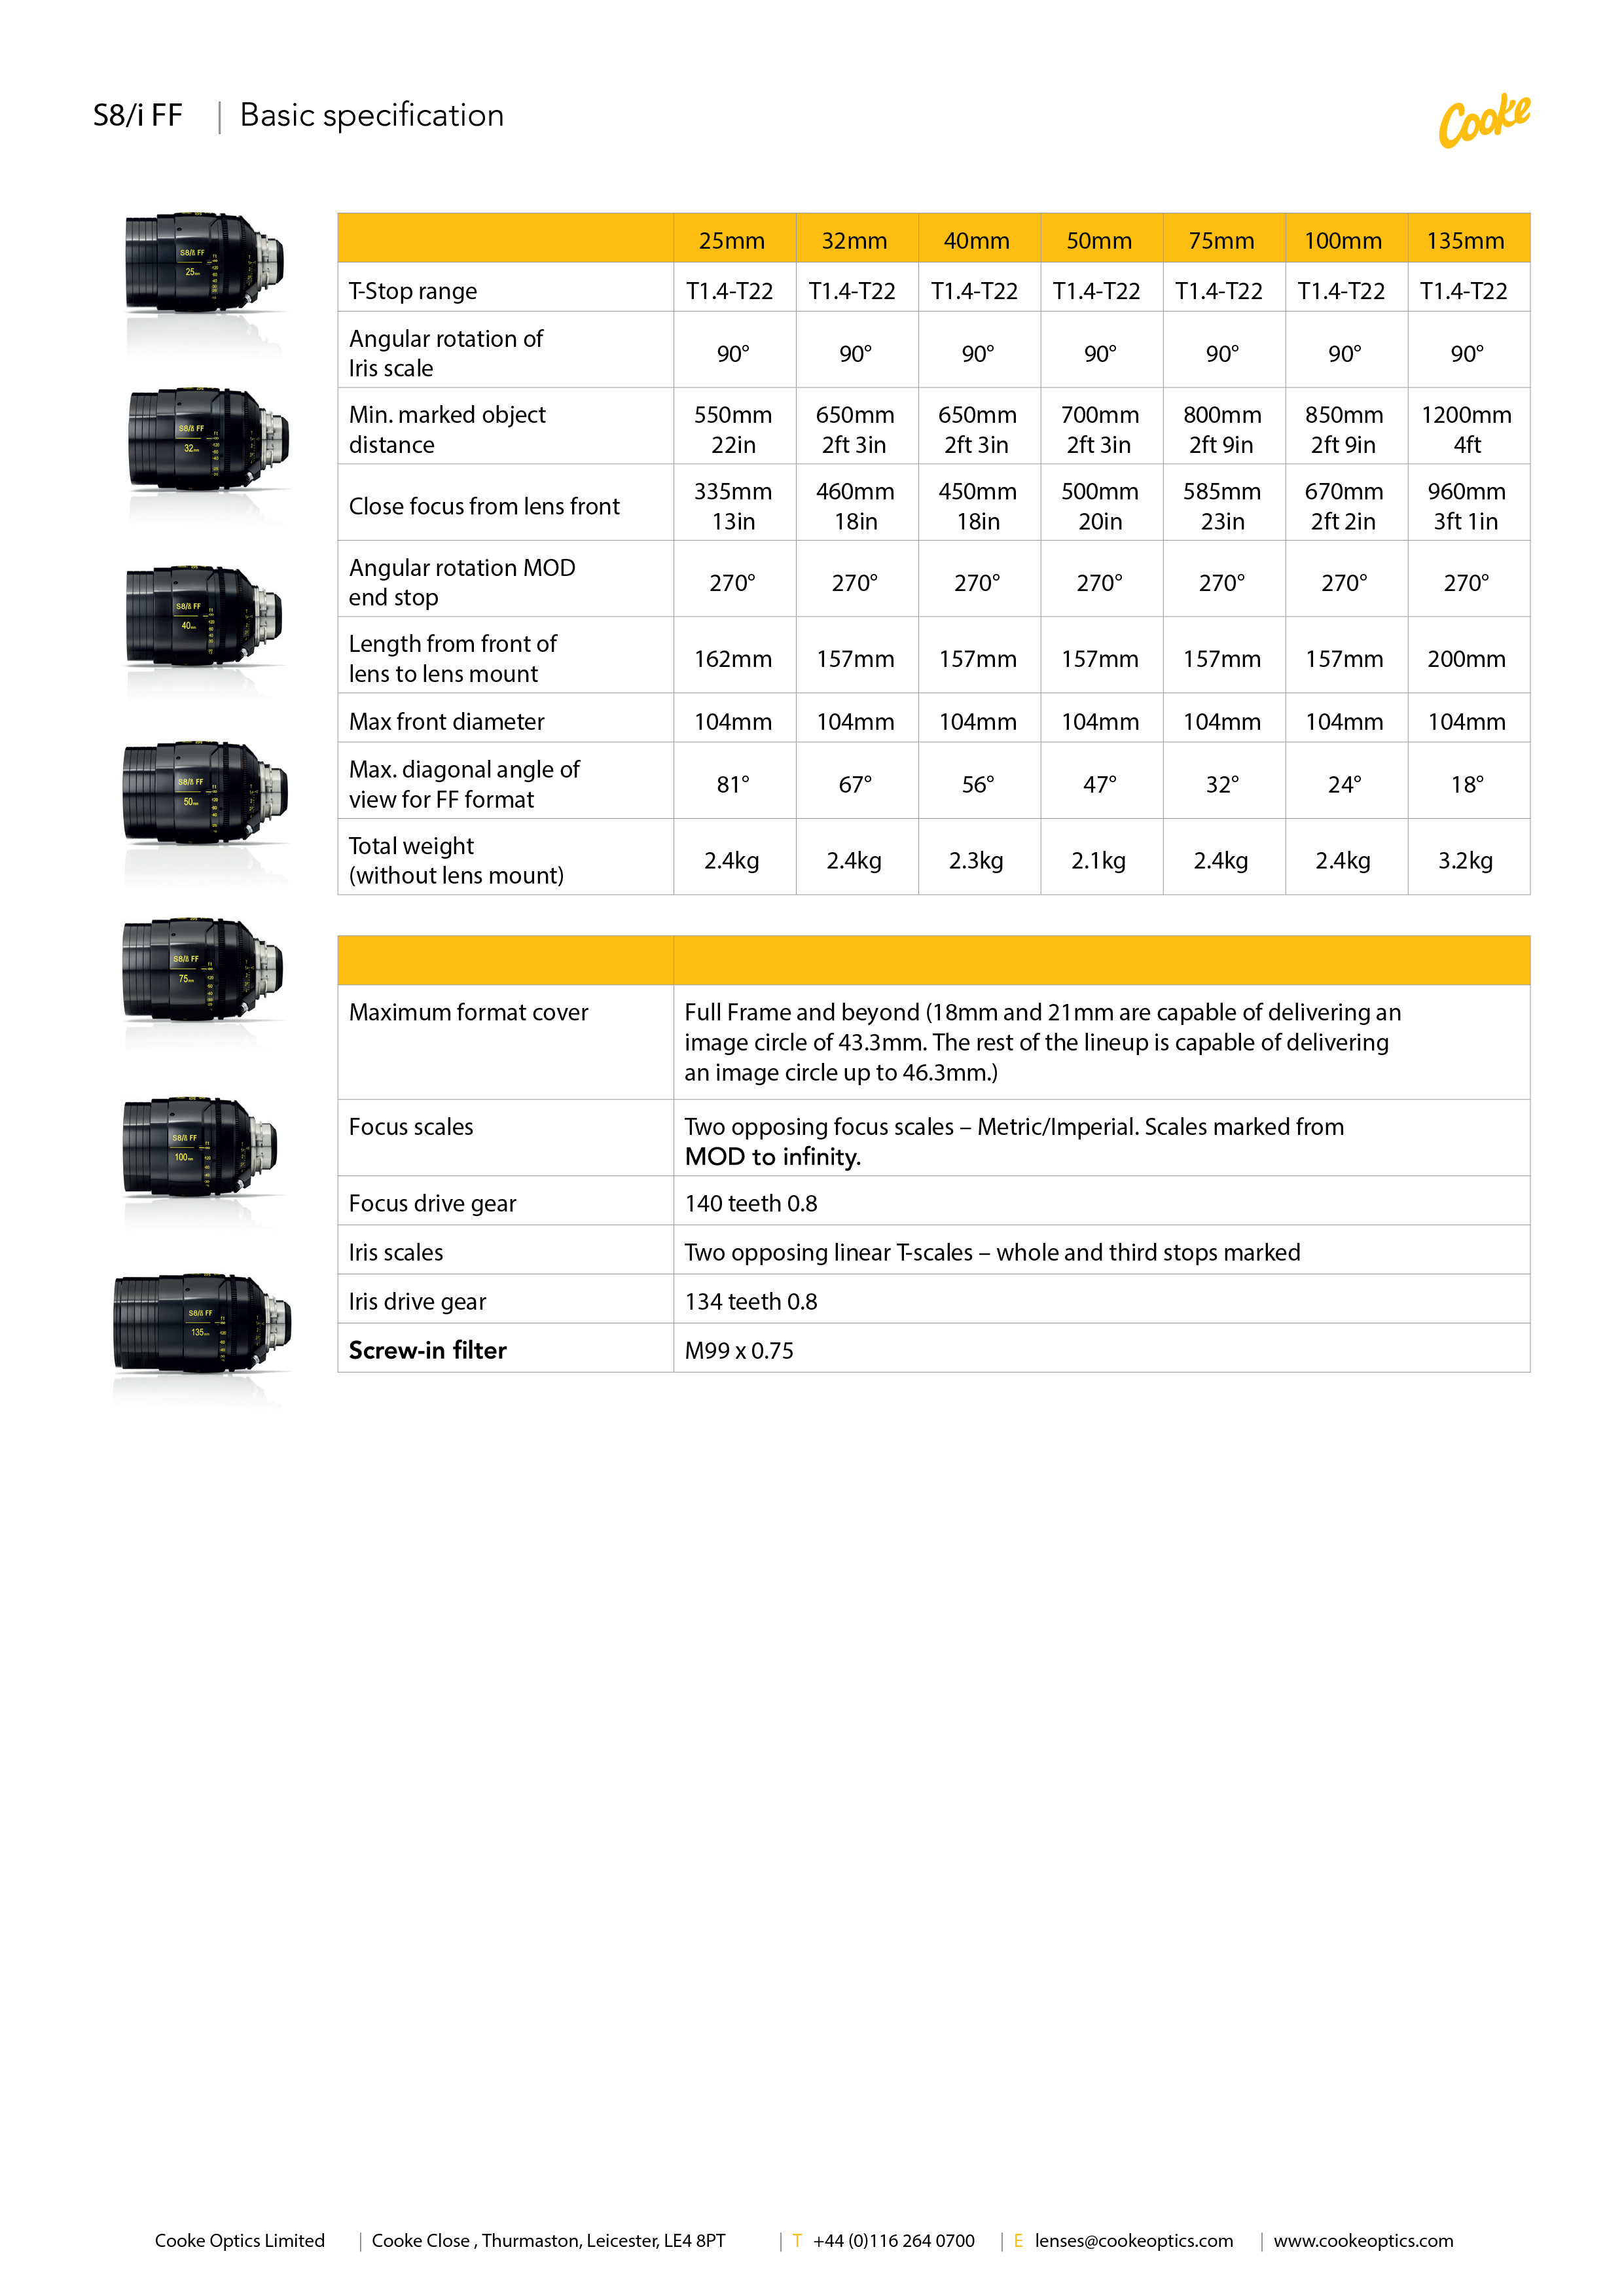 Cooke S8/i specifications